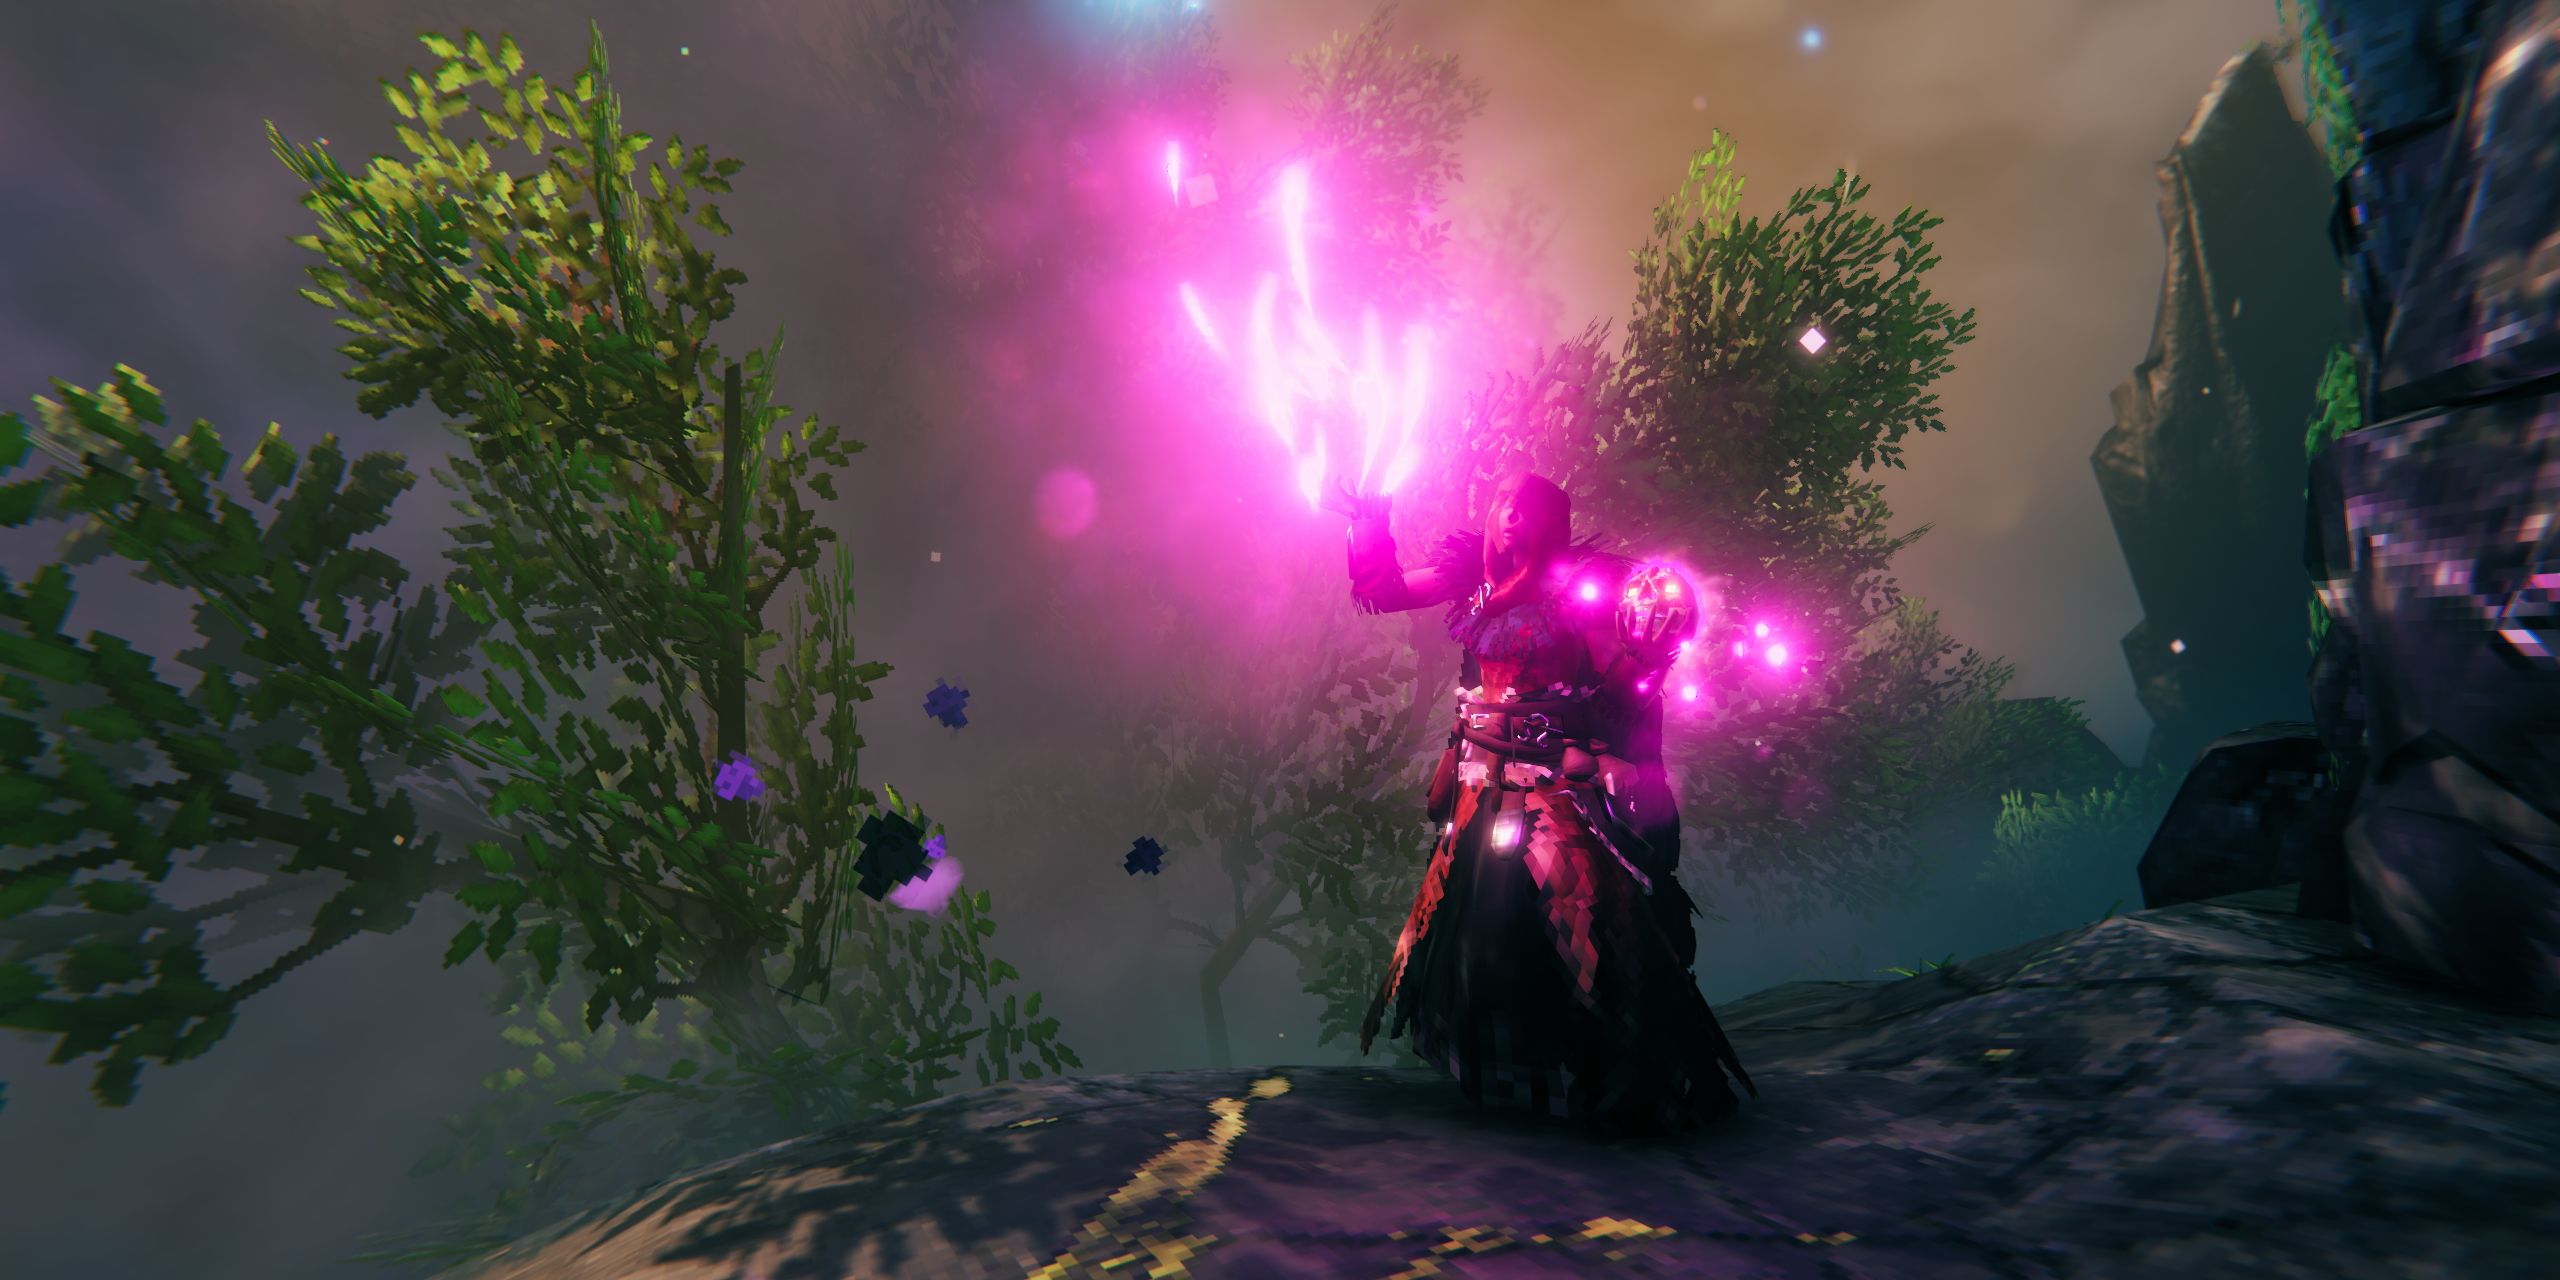 Purple Magic is used by the player in the Misty Lands of Valheim.